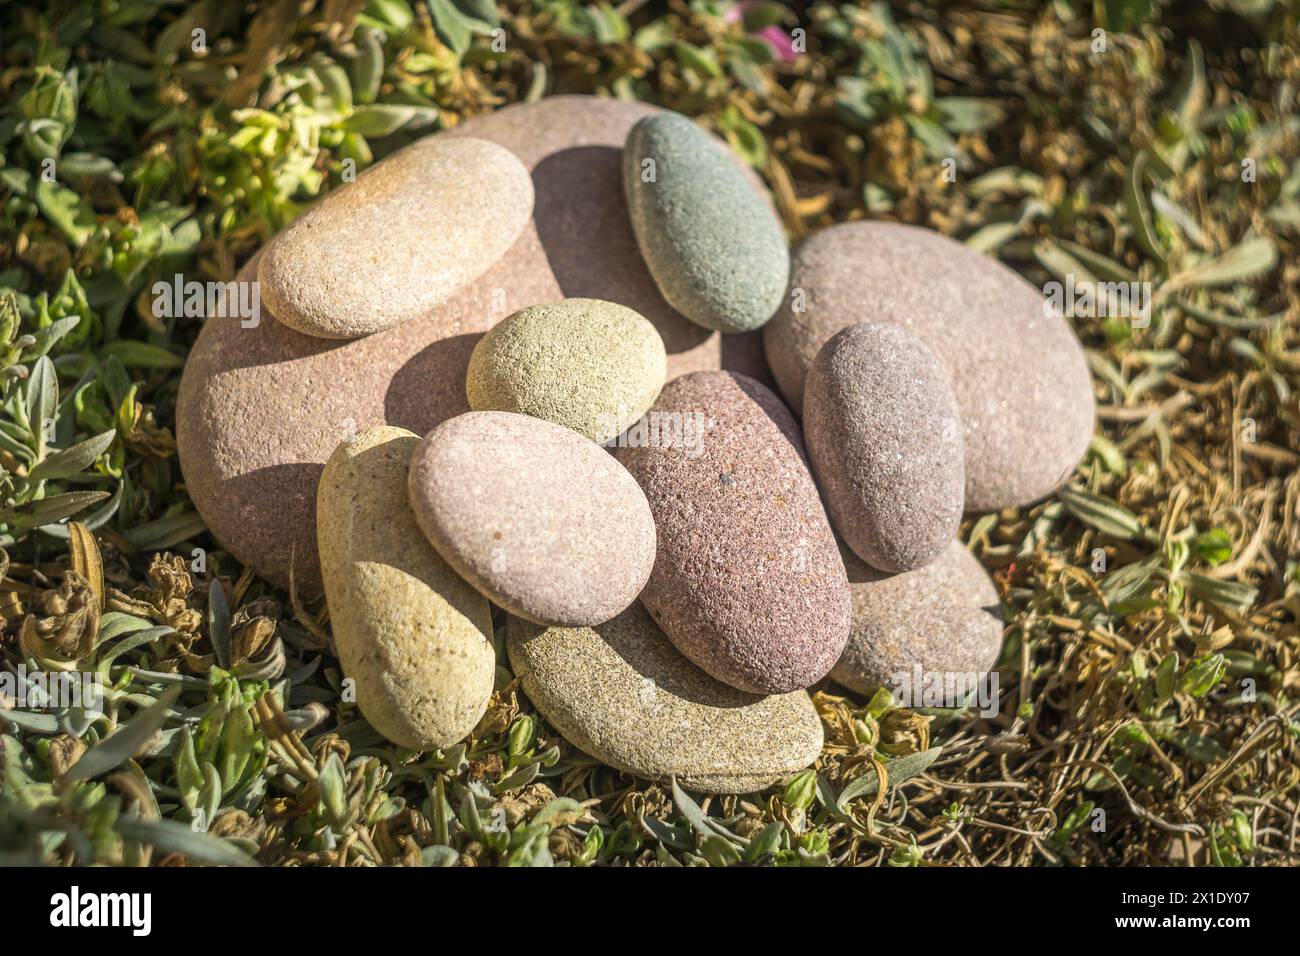 stones for meditation and rest in the nature, fallen stones Stock Photo